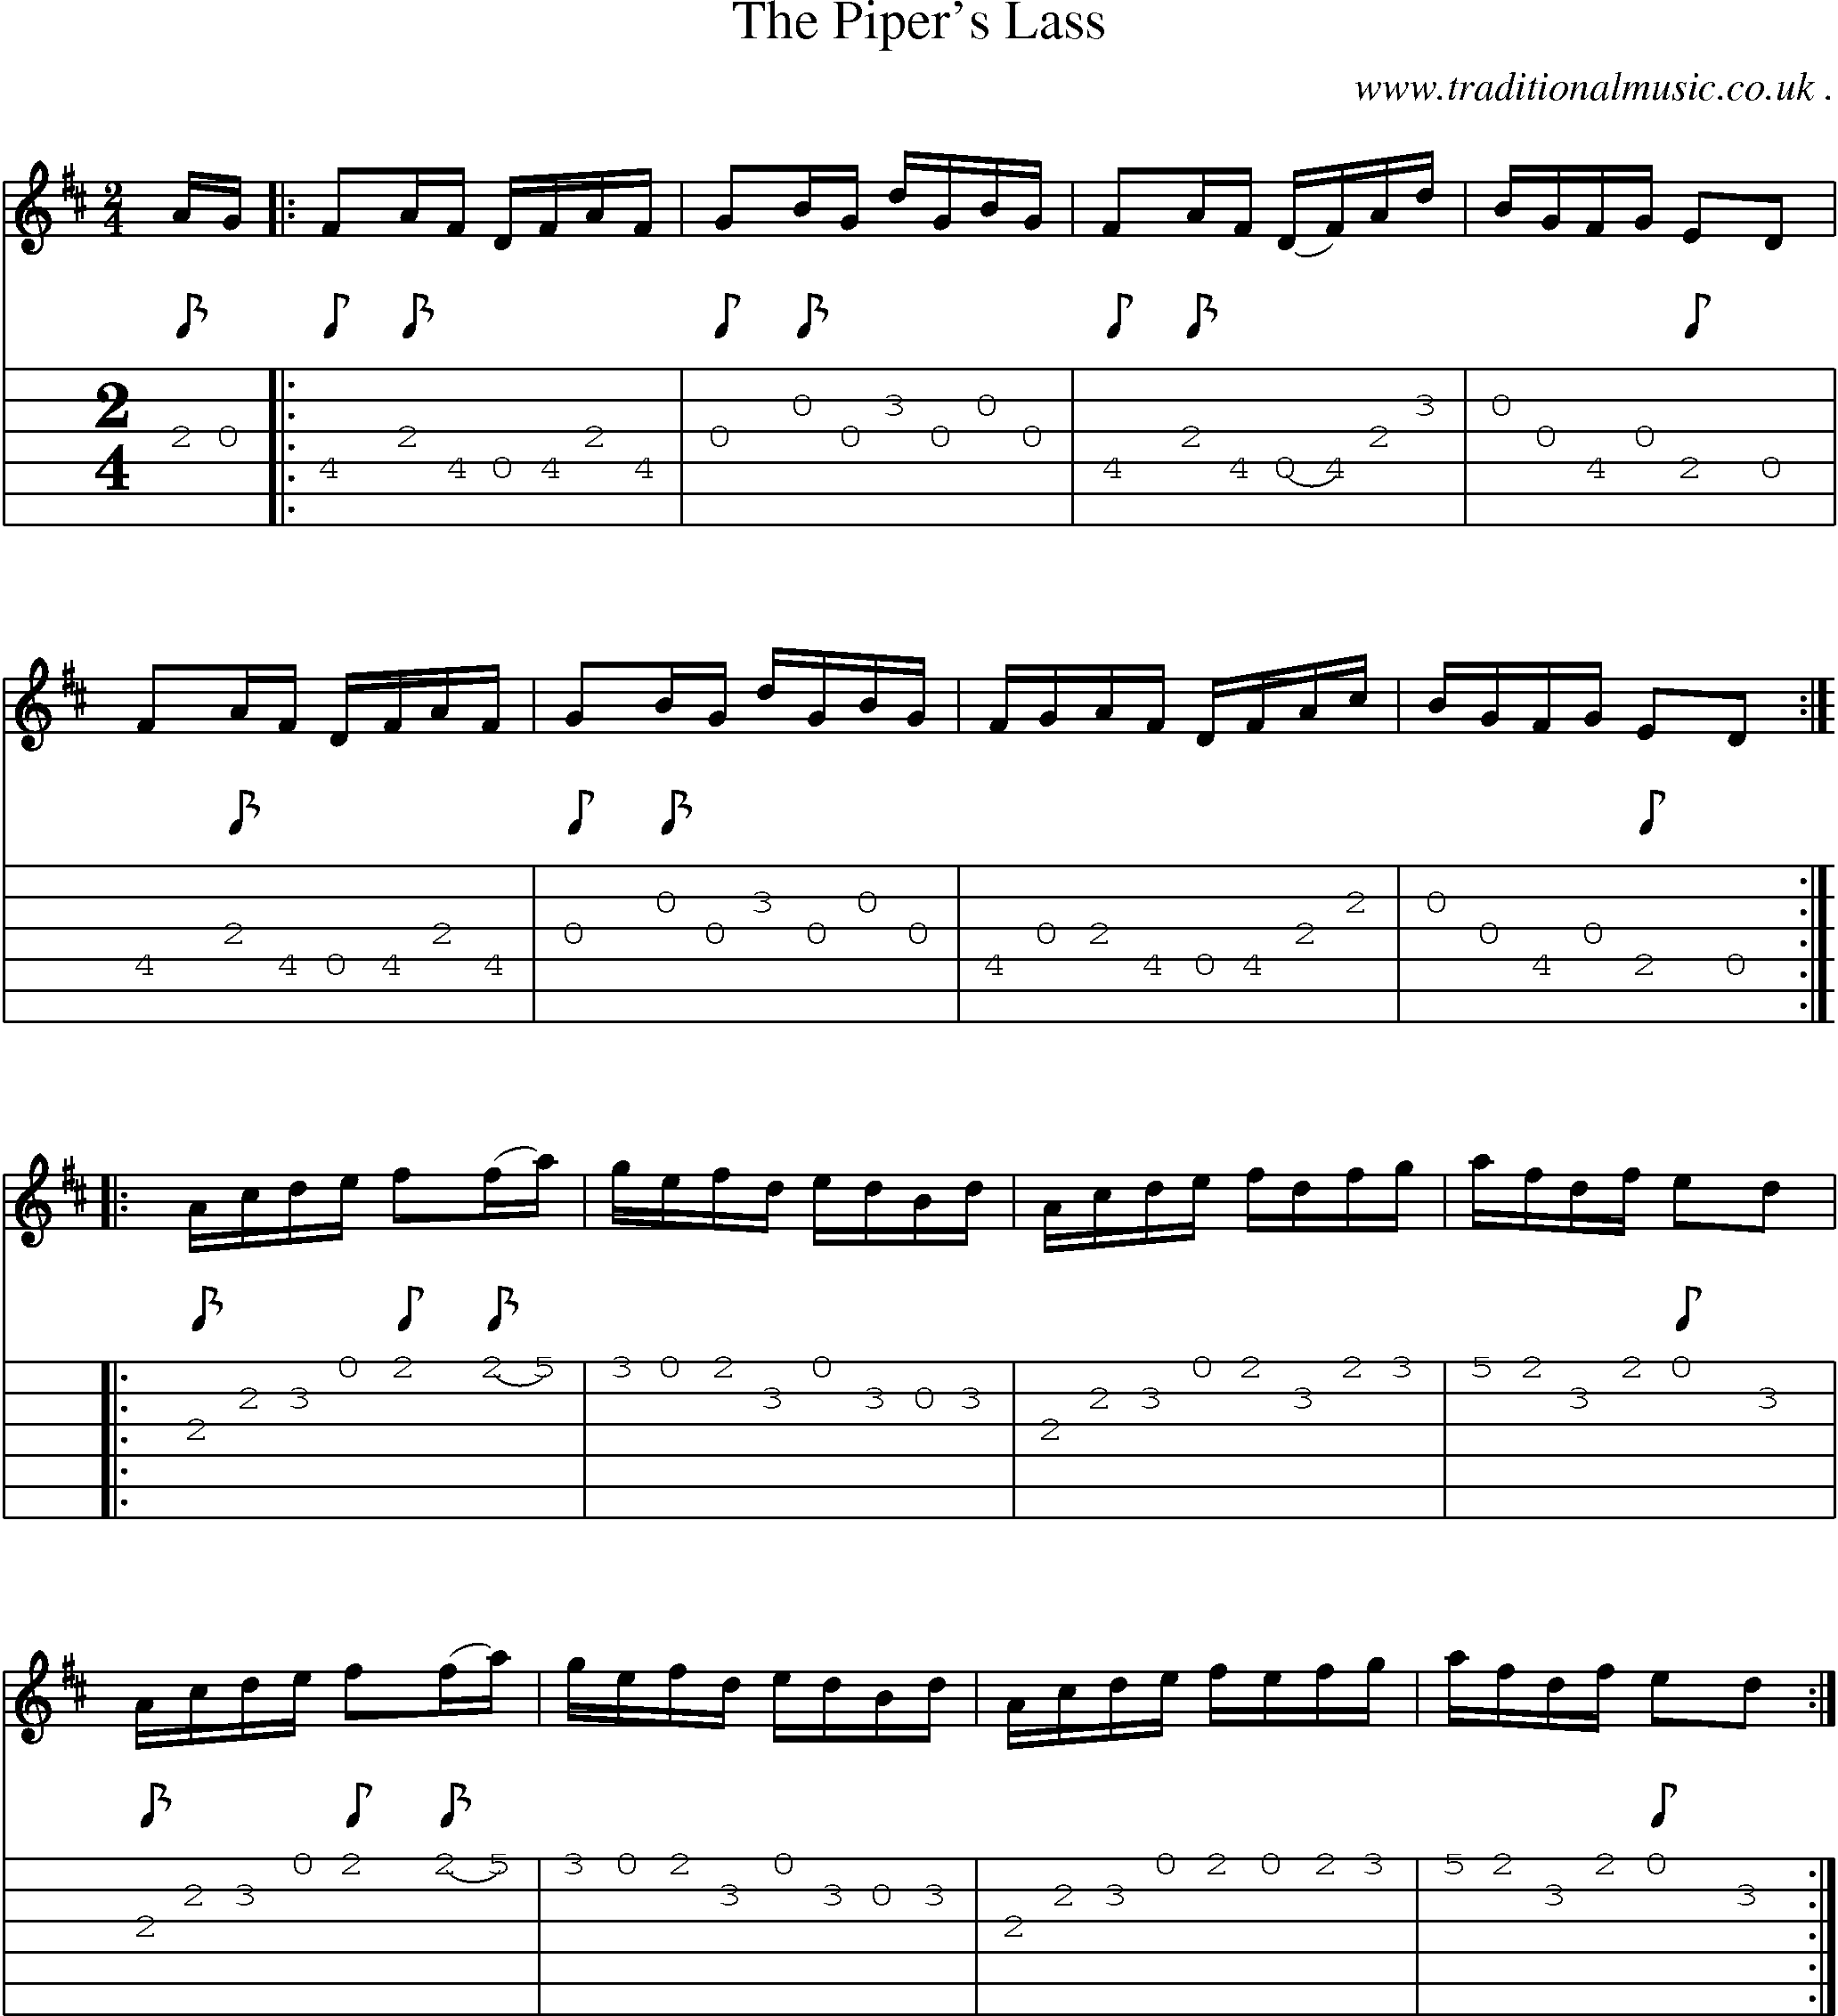 Sheet-Music and Guitar Tabs for The Pipers Lass